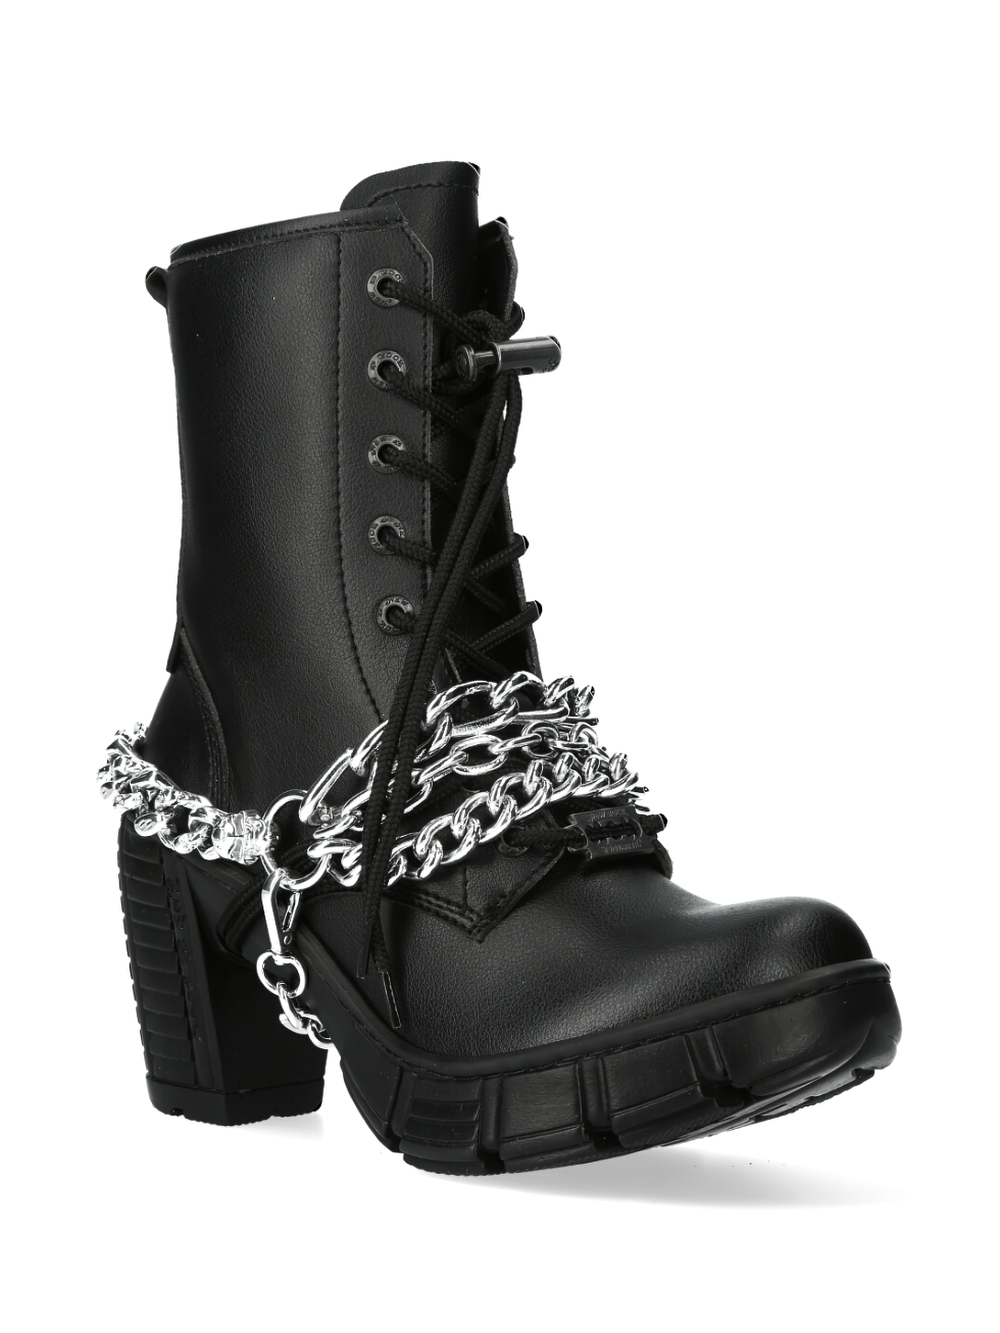 NEW ROCK Chain-Linked Black Ankle Boots with Zipper